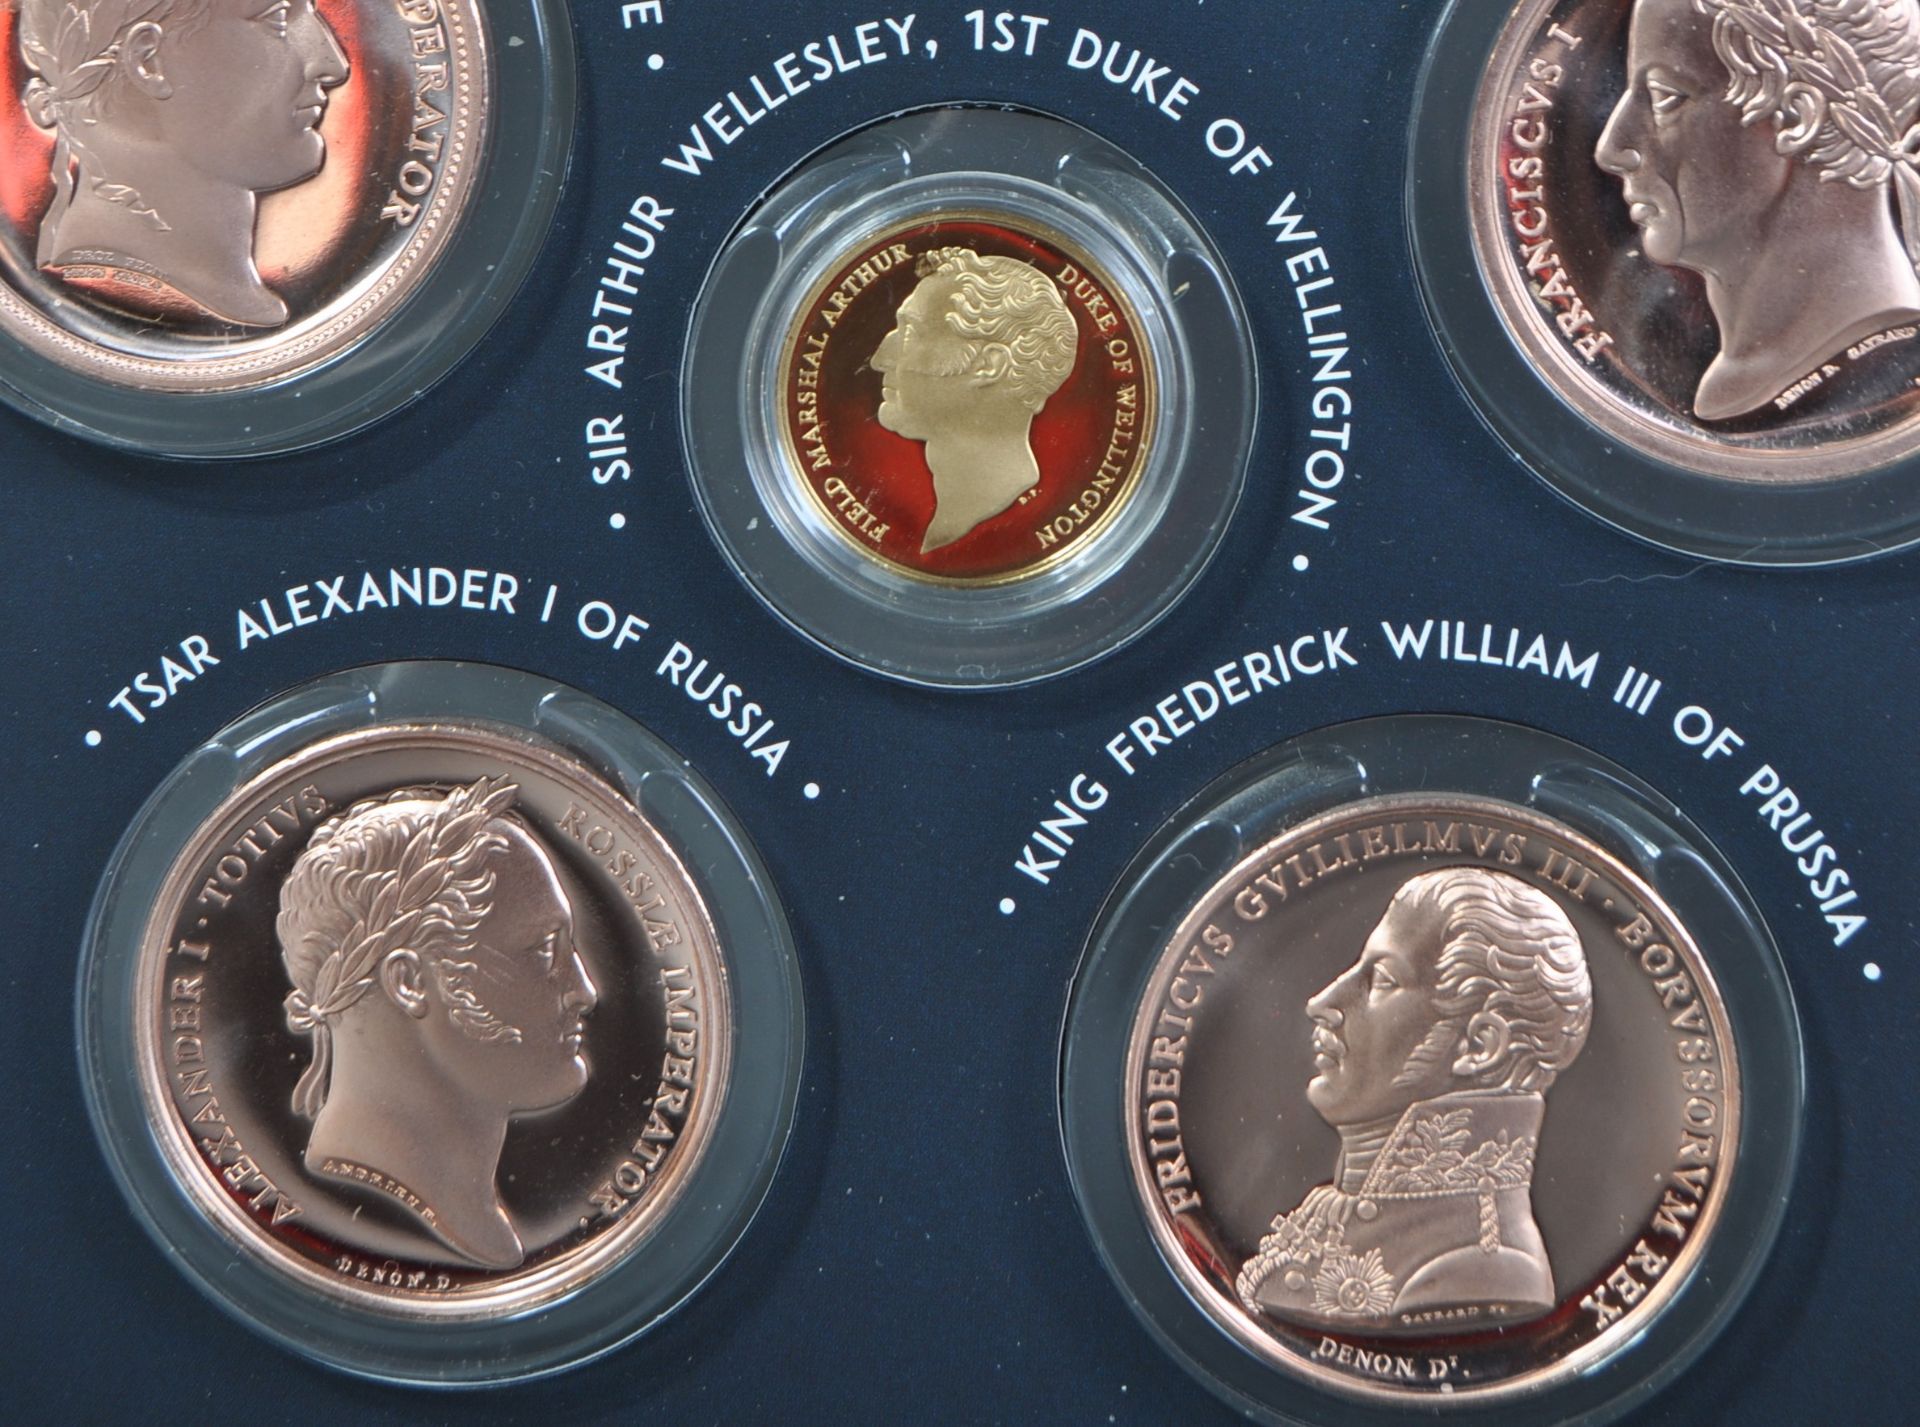 COINS - WATERLOO 200 - 2015 - COIN PRESENTATION SET - Image 3 of 6